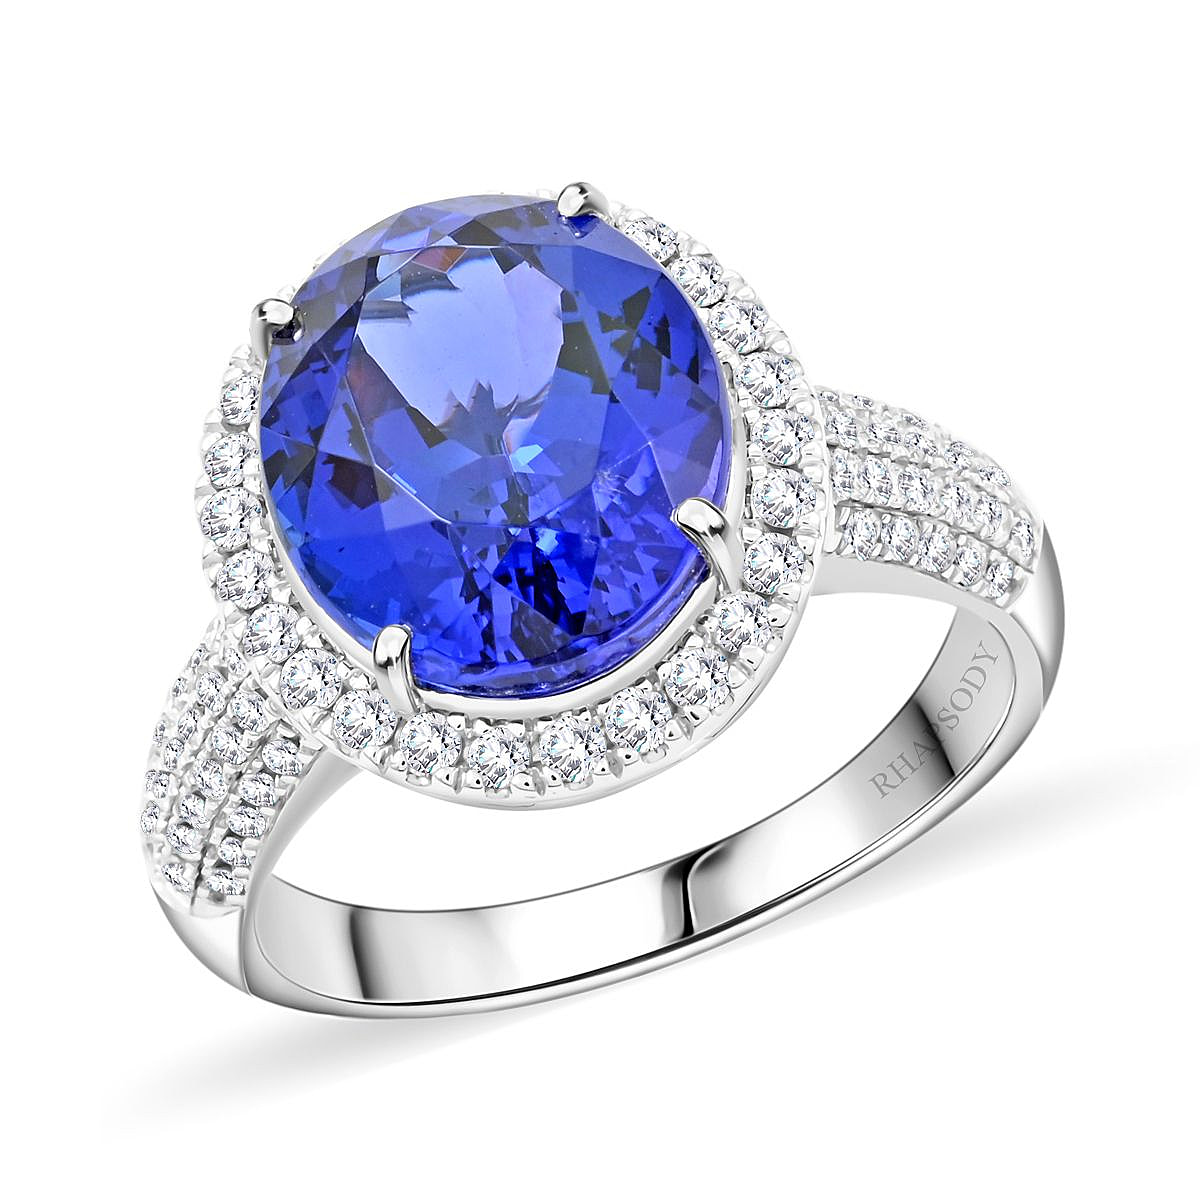 RHAPSODY 950 Platinum AGI Certified & Appraised AAAA Tanzanite (Ovl 7.43Cts) and Diamond (0.72Cts) Ring 8.15 Ct, Platinum Wt. 9.24 Gms